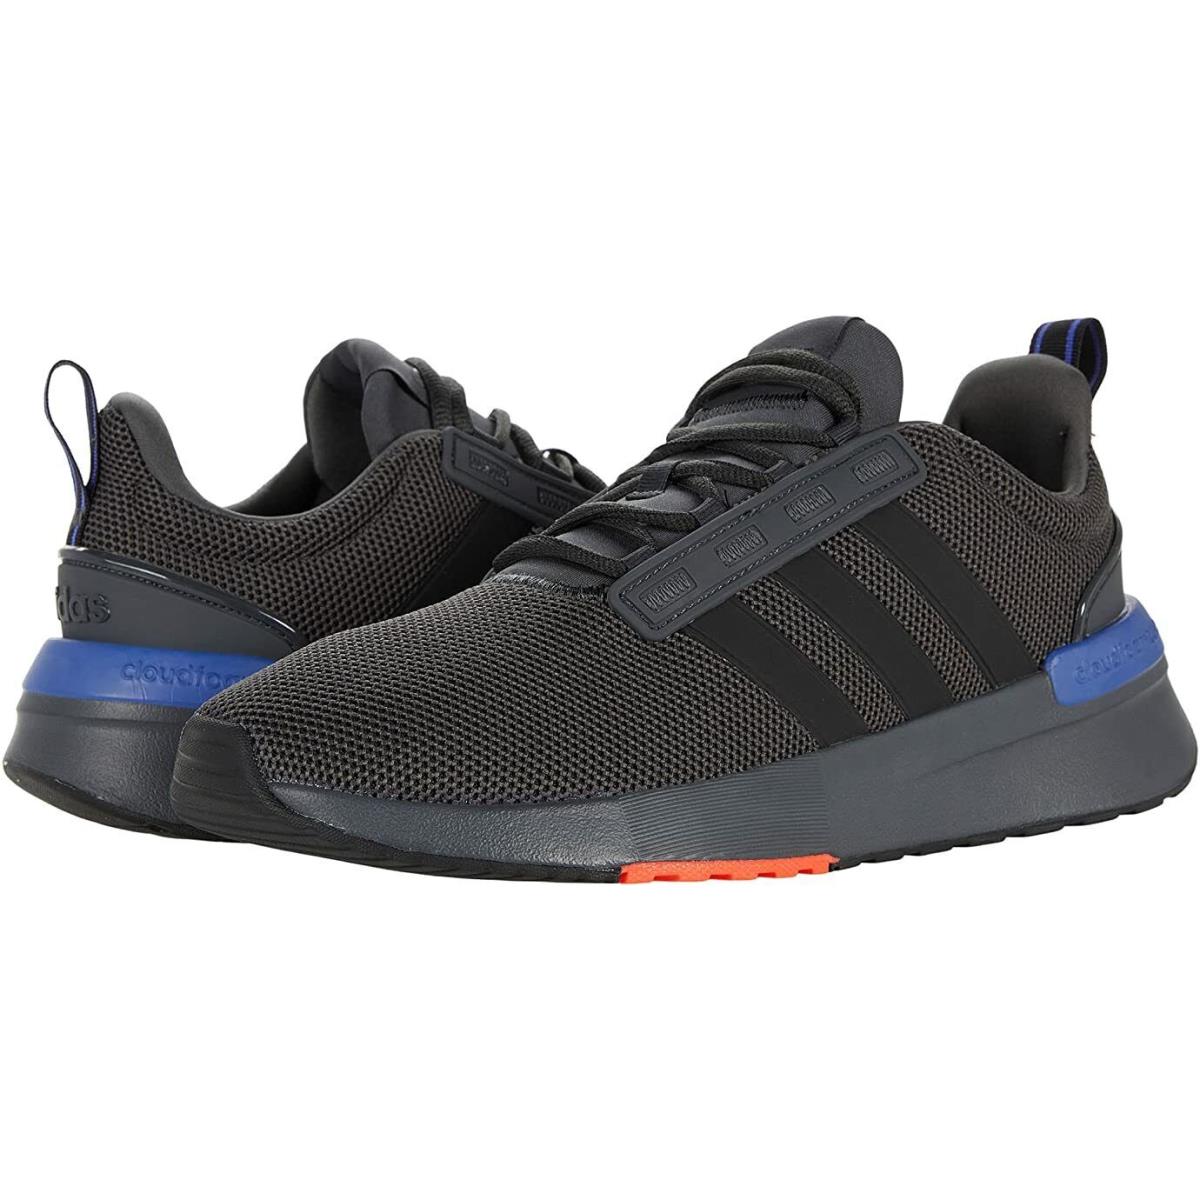 Men`s Shoes Adidas Running Racer TR 21 Athletic Sneakers GZ8185 Grey / Black